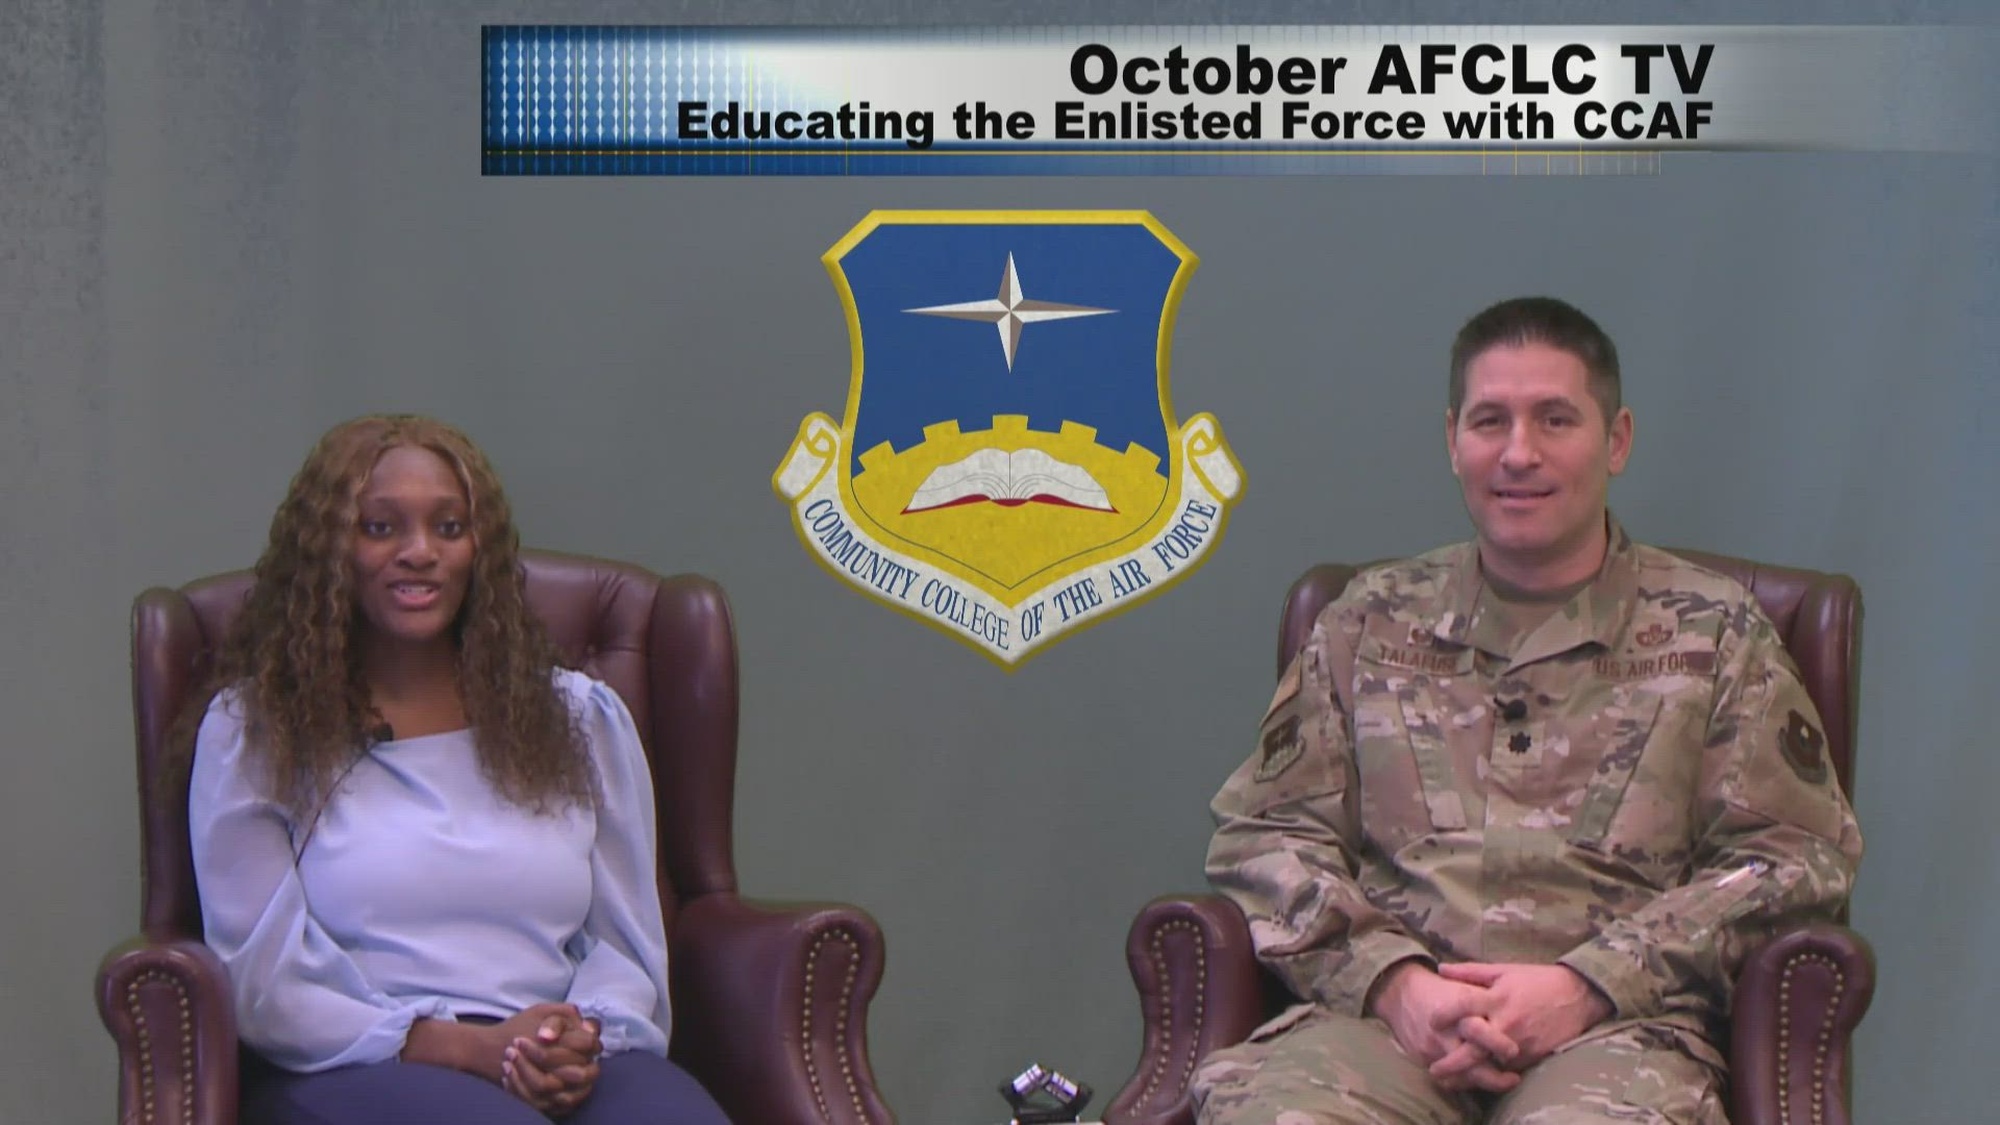 On this episode of AFCLC TV, we chatted with Lt. Col. Thomas Talafuse, Commander, Community College of the Air Force, on educational opportunities for the enlisted force through CCAF.